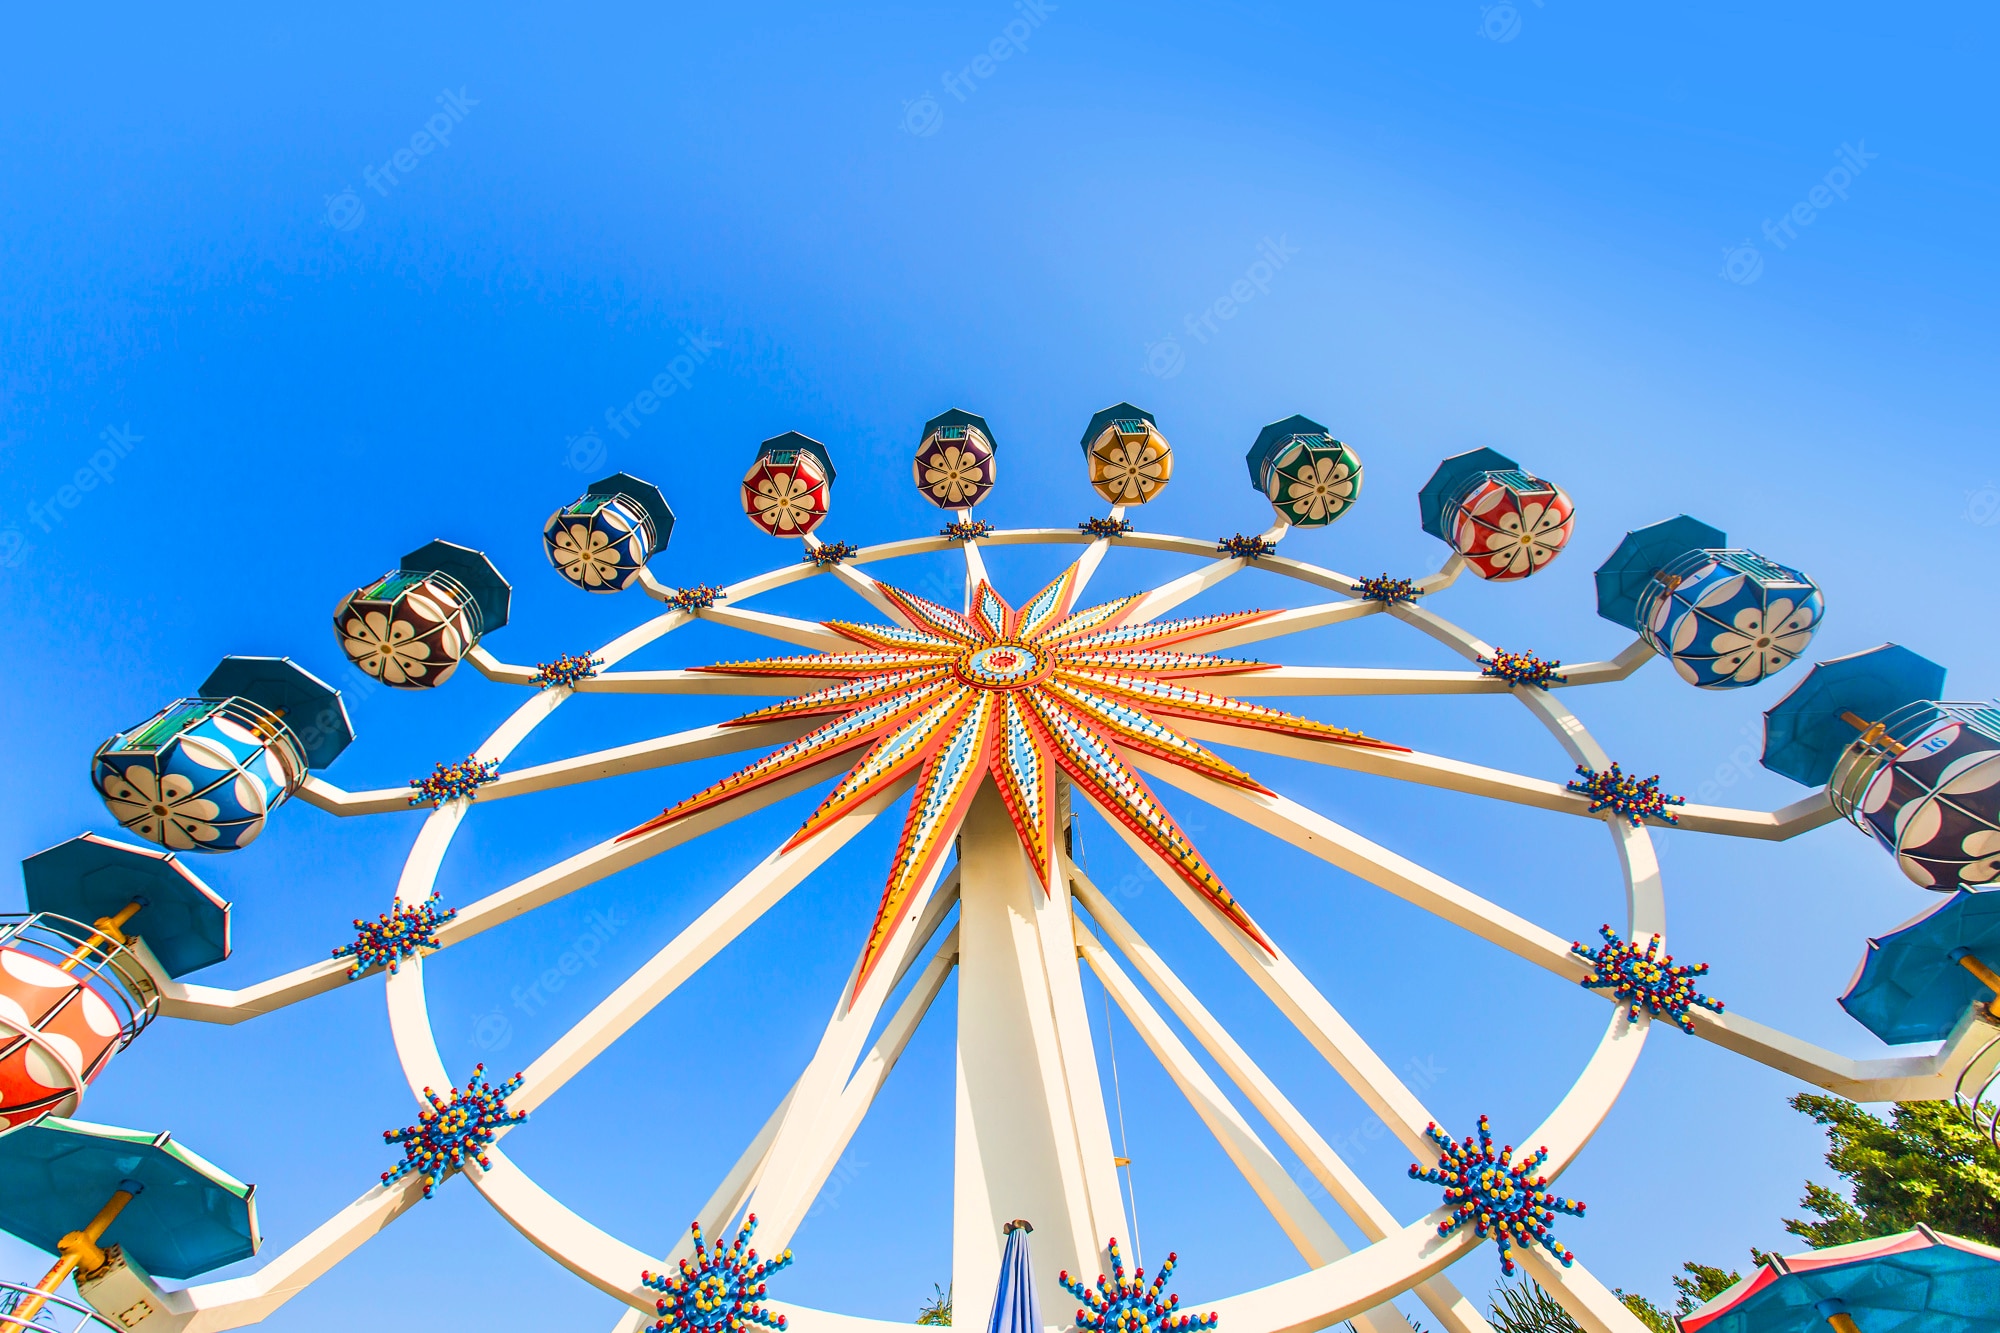 State Fair Image. Free Vectors, & PSD